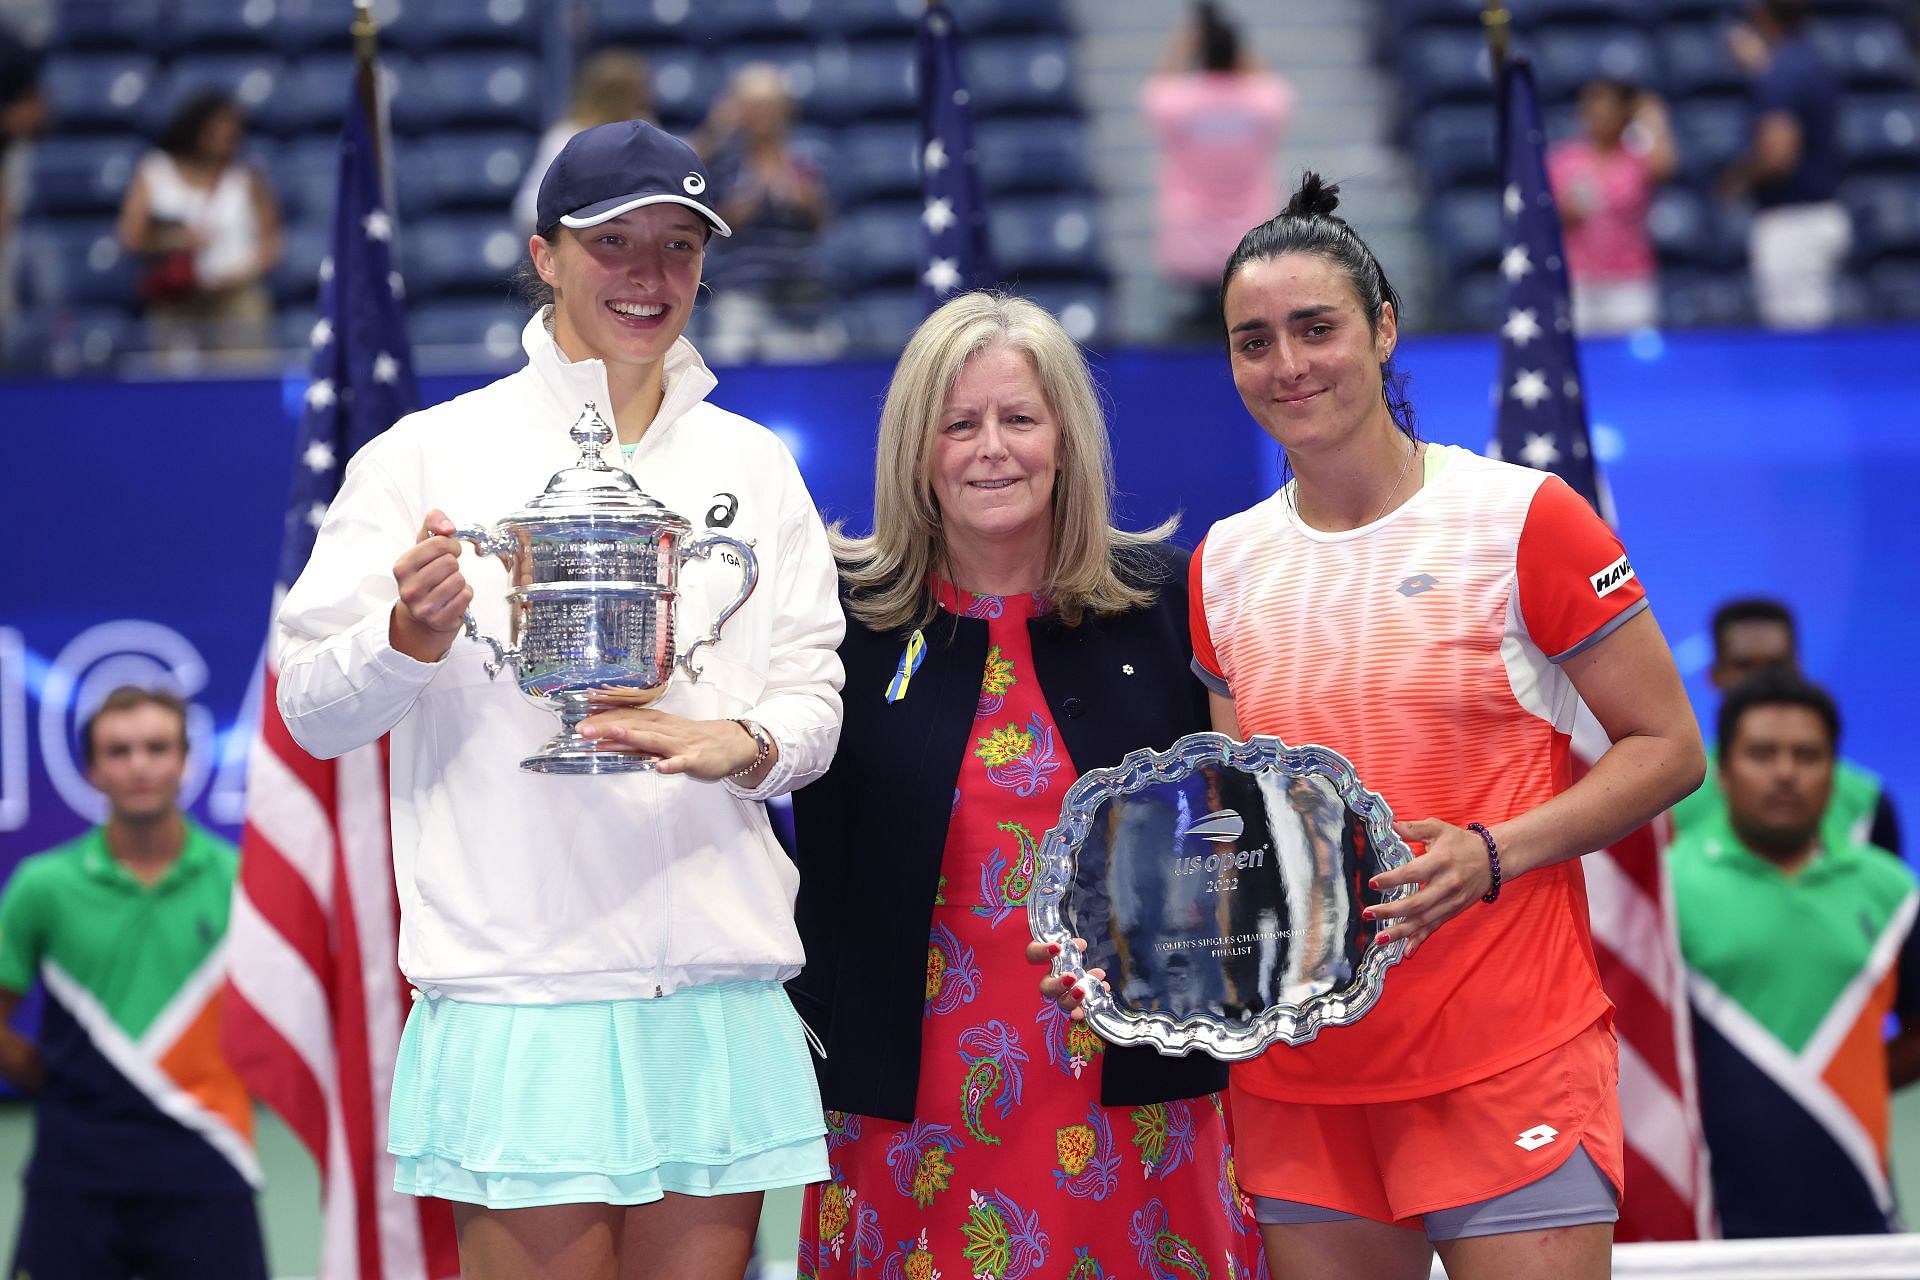 Stacey Allaster (center) with Iga Swiatek (left) and Ons Jabeur: US Open 2022